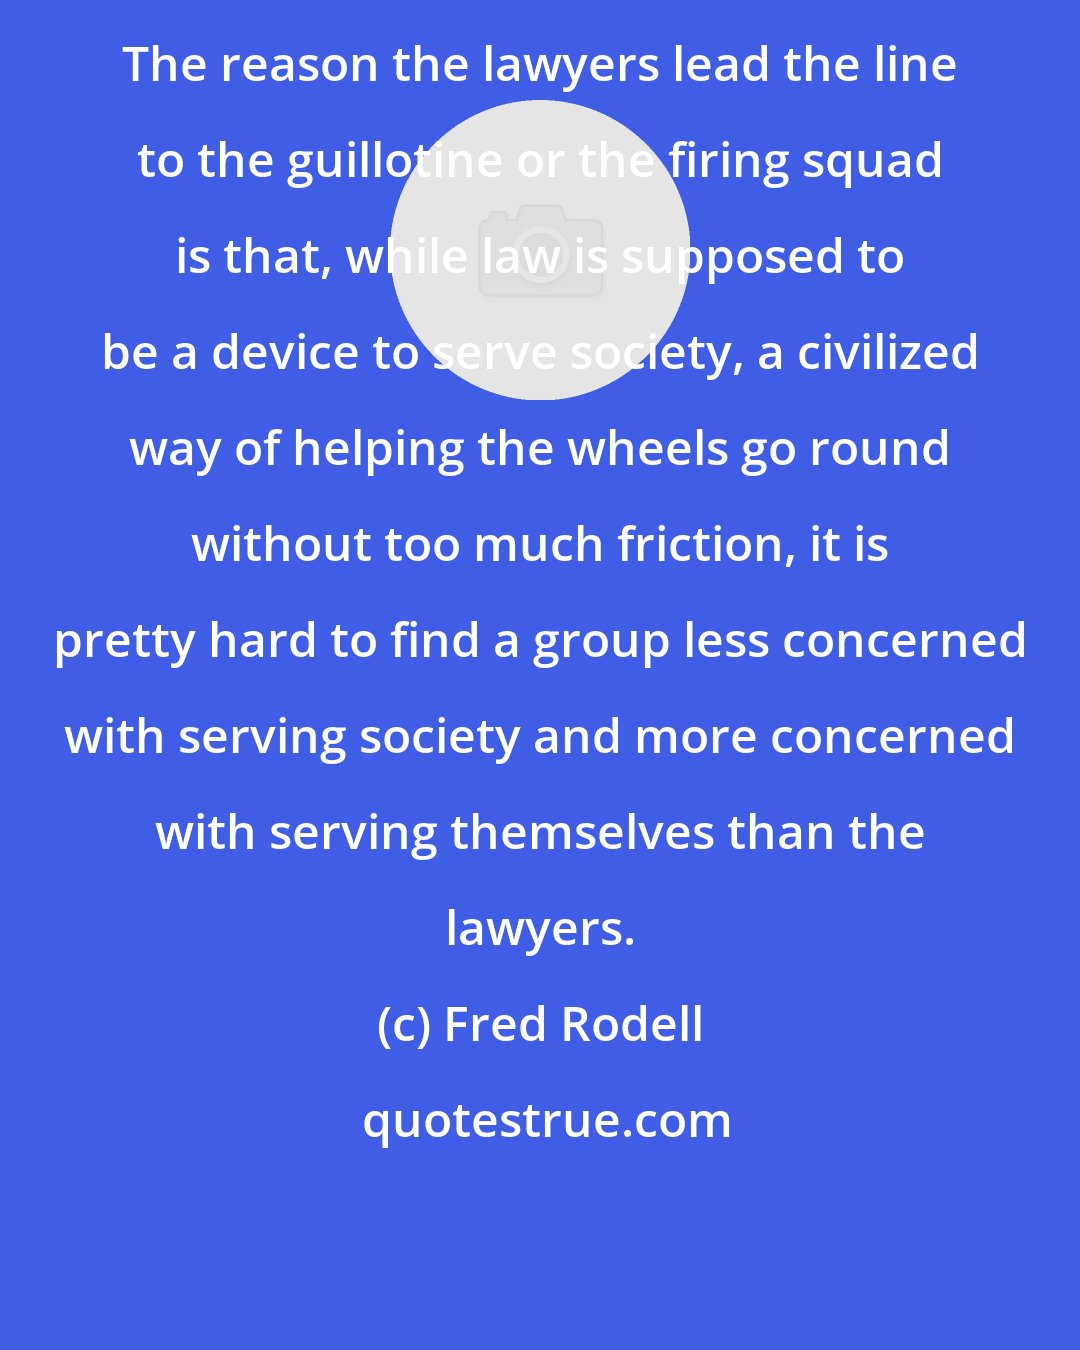 Fred Rodell: The reason the lawyers lead the line to the guillotine or the firing squad is that, while law is supposed to be a device to serve society, a civilized way of helping the wheels go round without too much friction, it is pretty hard to find a group less concerned with serving society and more concerned with serving themselves than the lawyers.